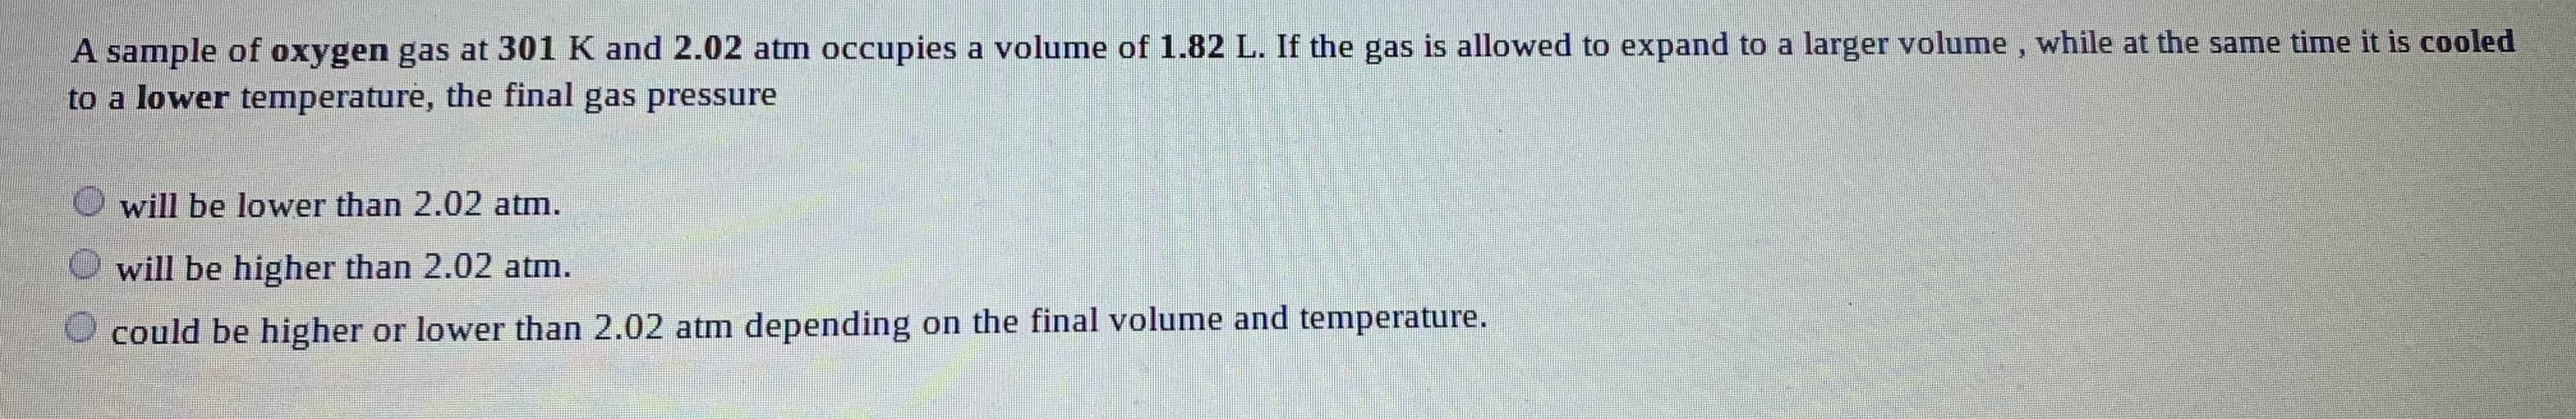 A sample of oxygen gas at 301 K and 2.02 atm occupies a volume of 1.82 L. If the gas is allowed to expand to a larger volume, while at the same time it is cooled
to a lower temperature, the final gas pressure
will be lower than 2.02 atm.
O will be higher than 2.02 atm.
could be higher or lower than 2.02 atm depending on the final volume and temperature.
